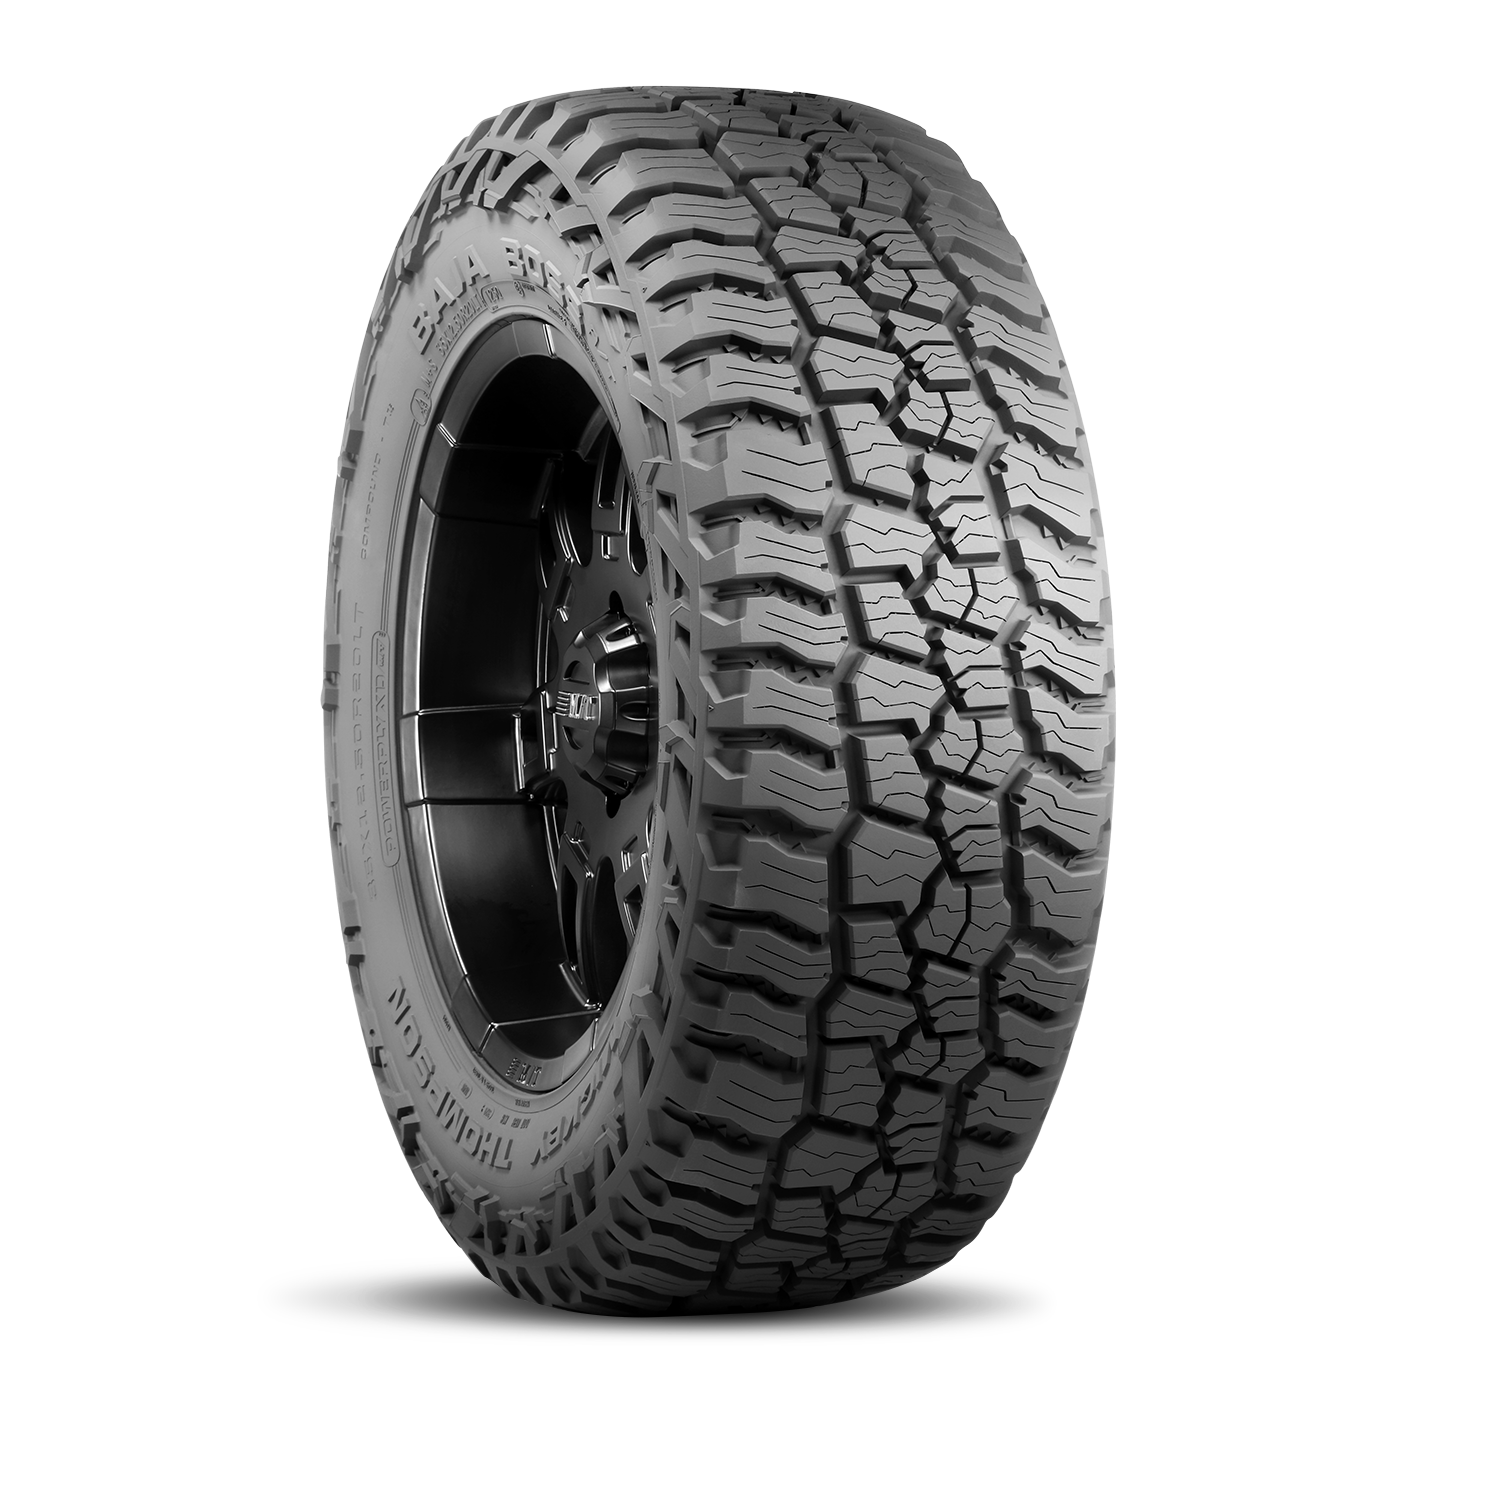 265/75R16 116T MICKEY THOMPSON BAJA BOSS AT ALL-WEATHER TIRES (M+S + SNOWFLAKE)